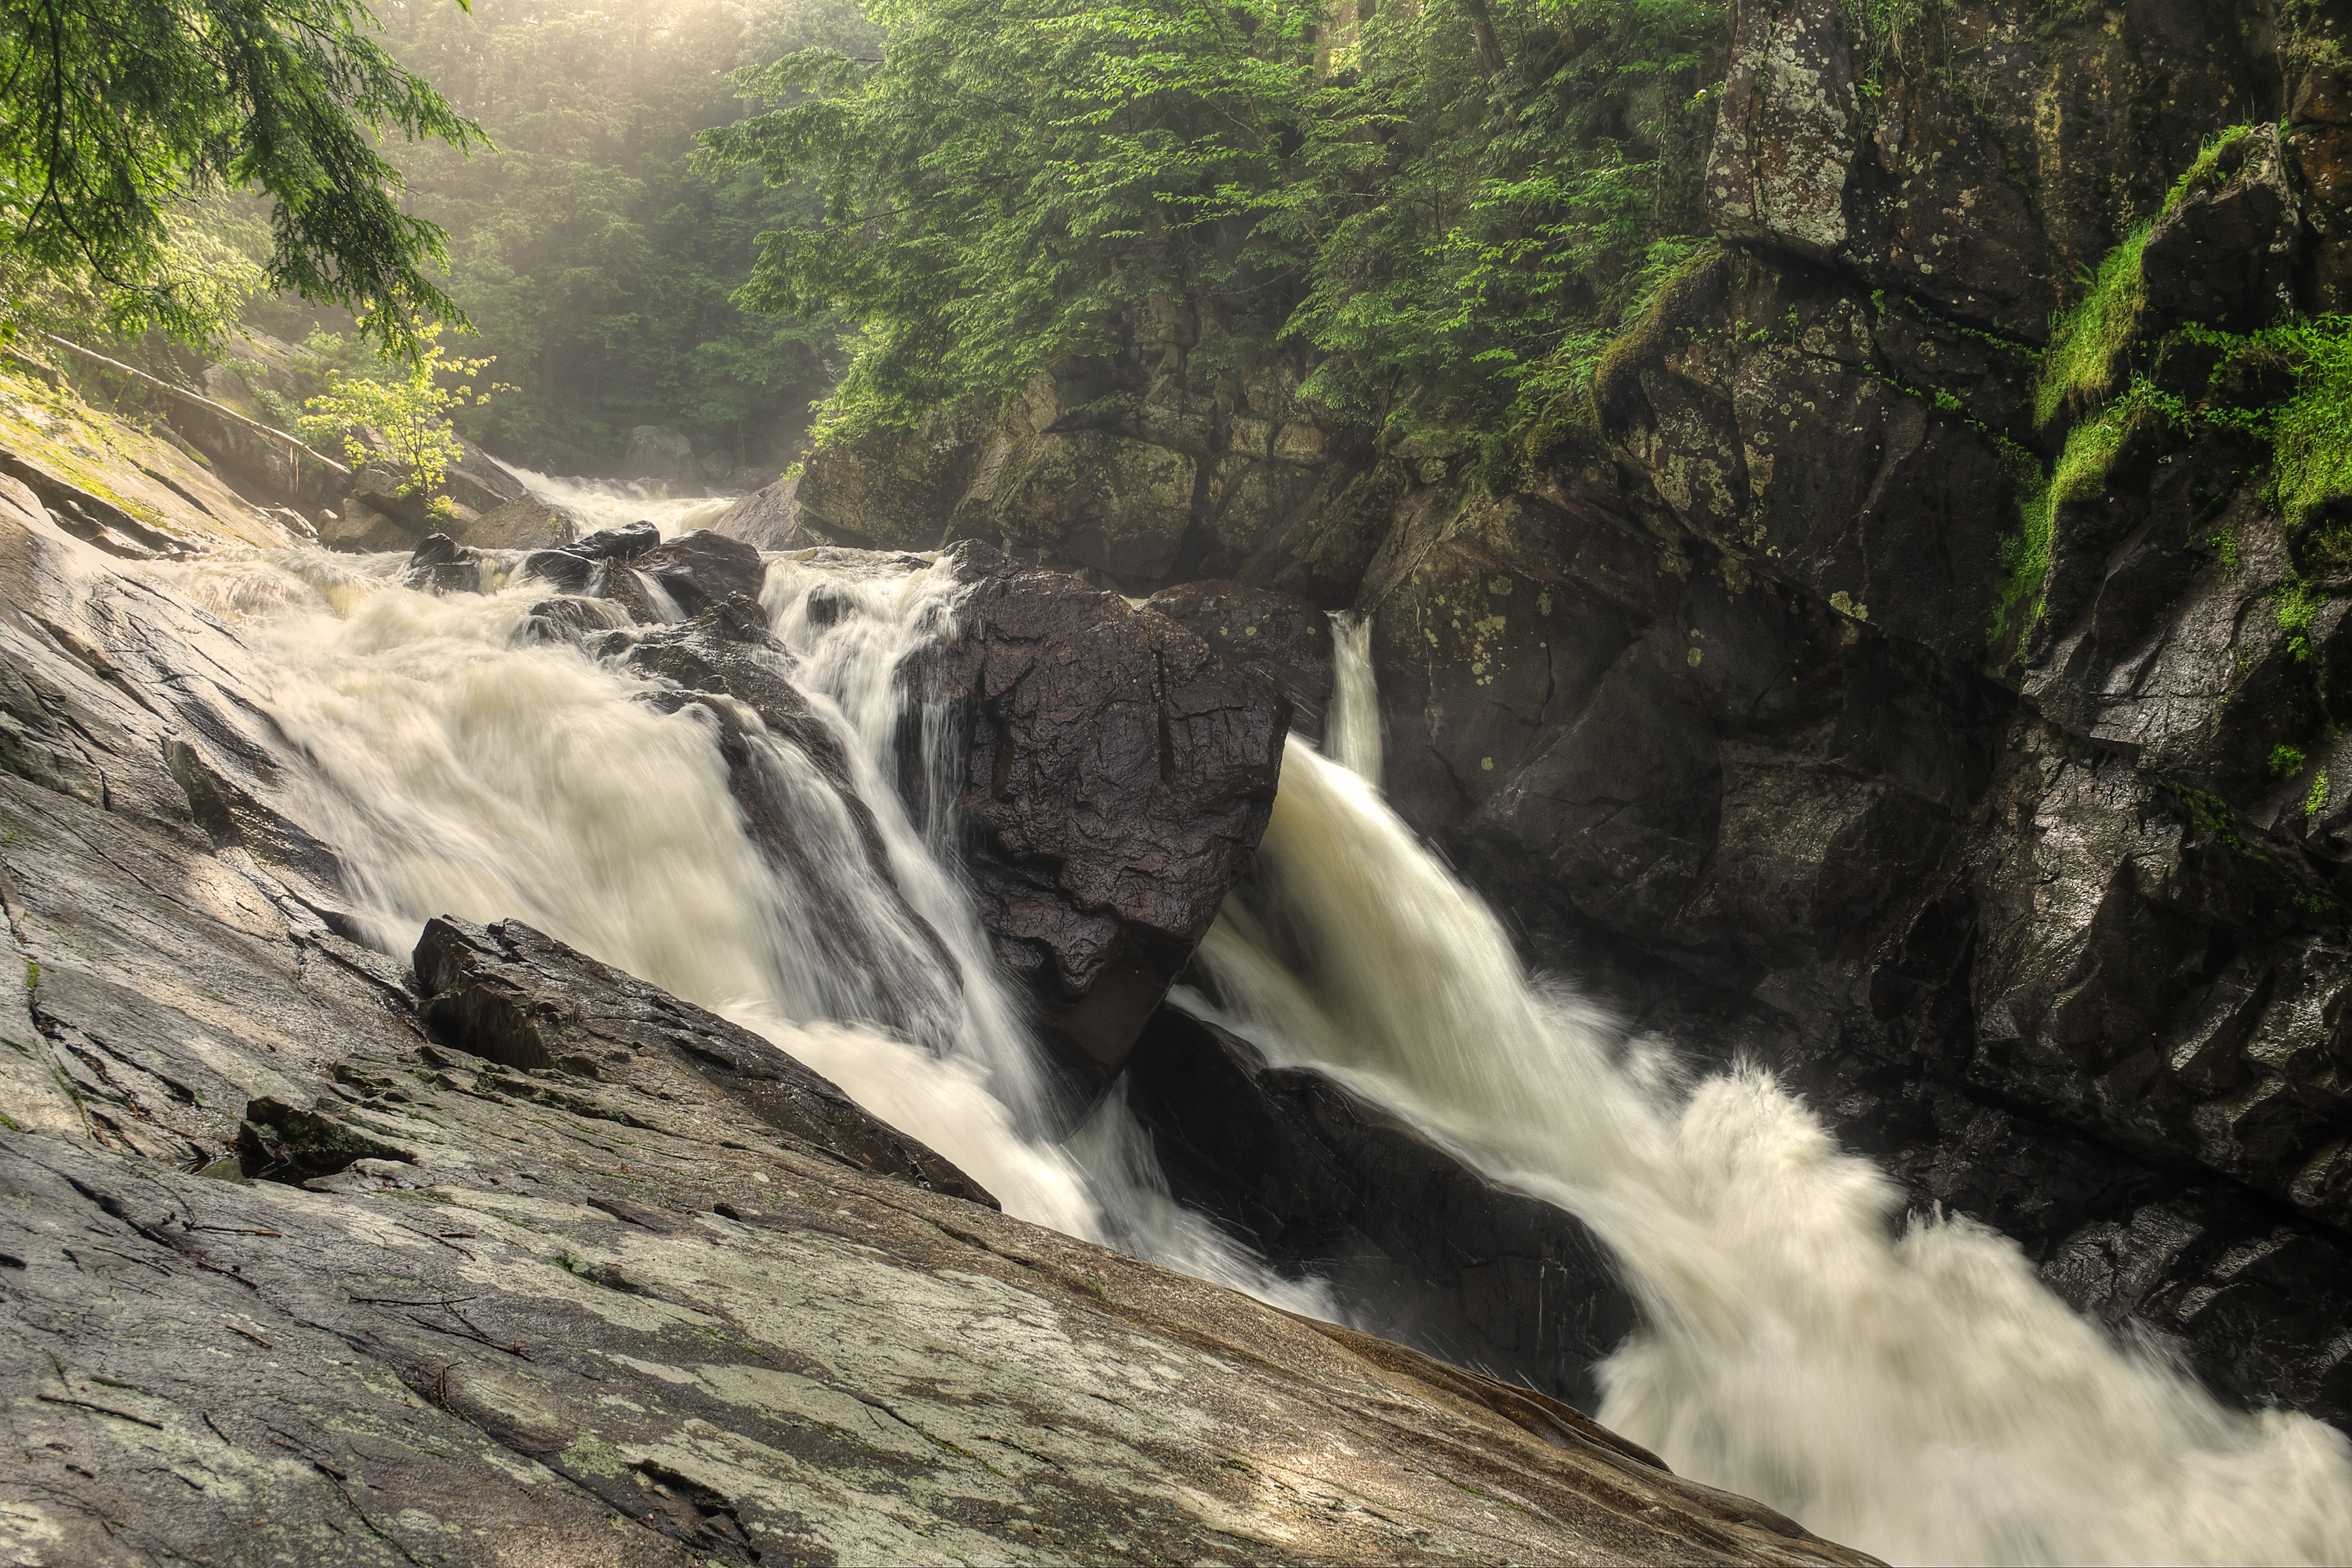 Auger Falls; image credit to Dig the Falls